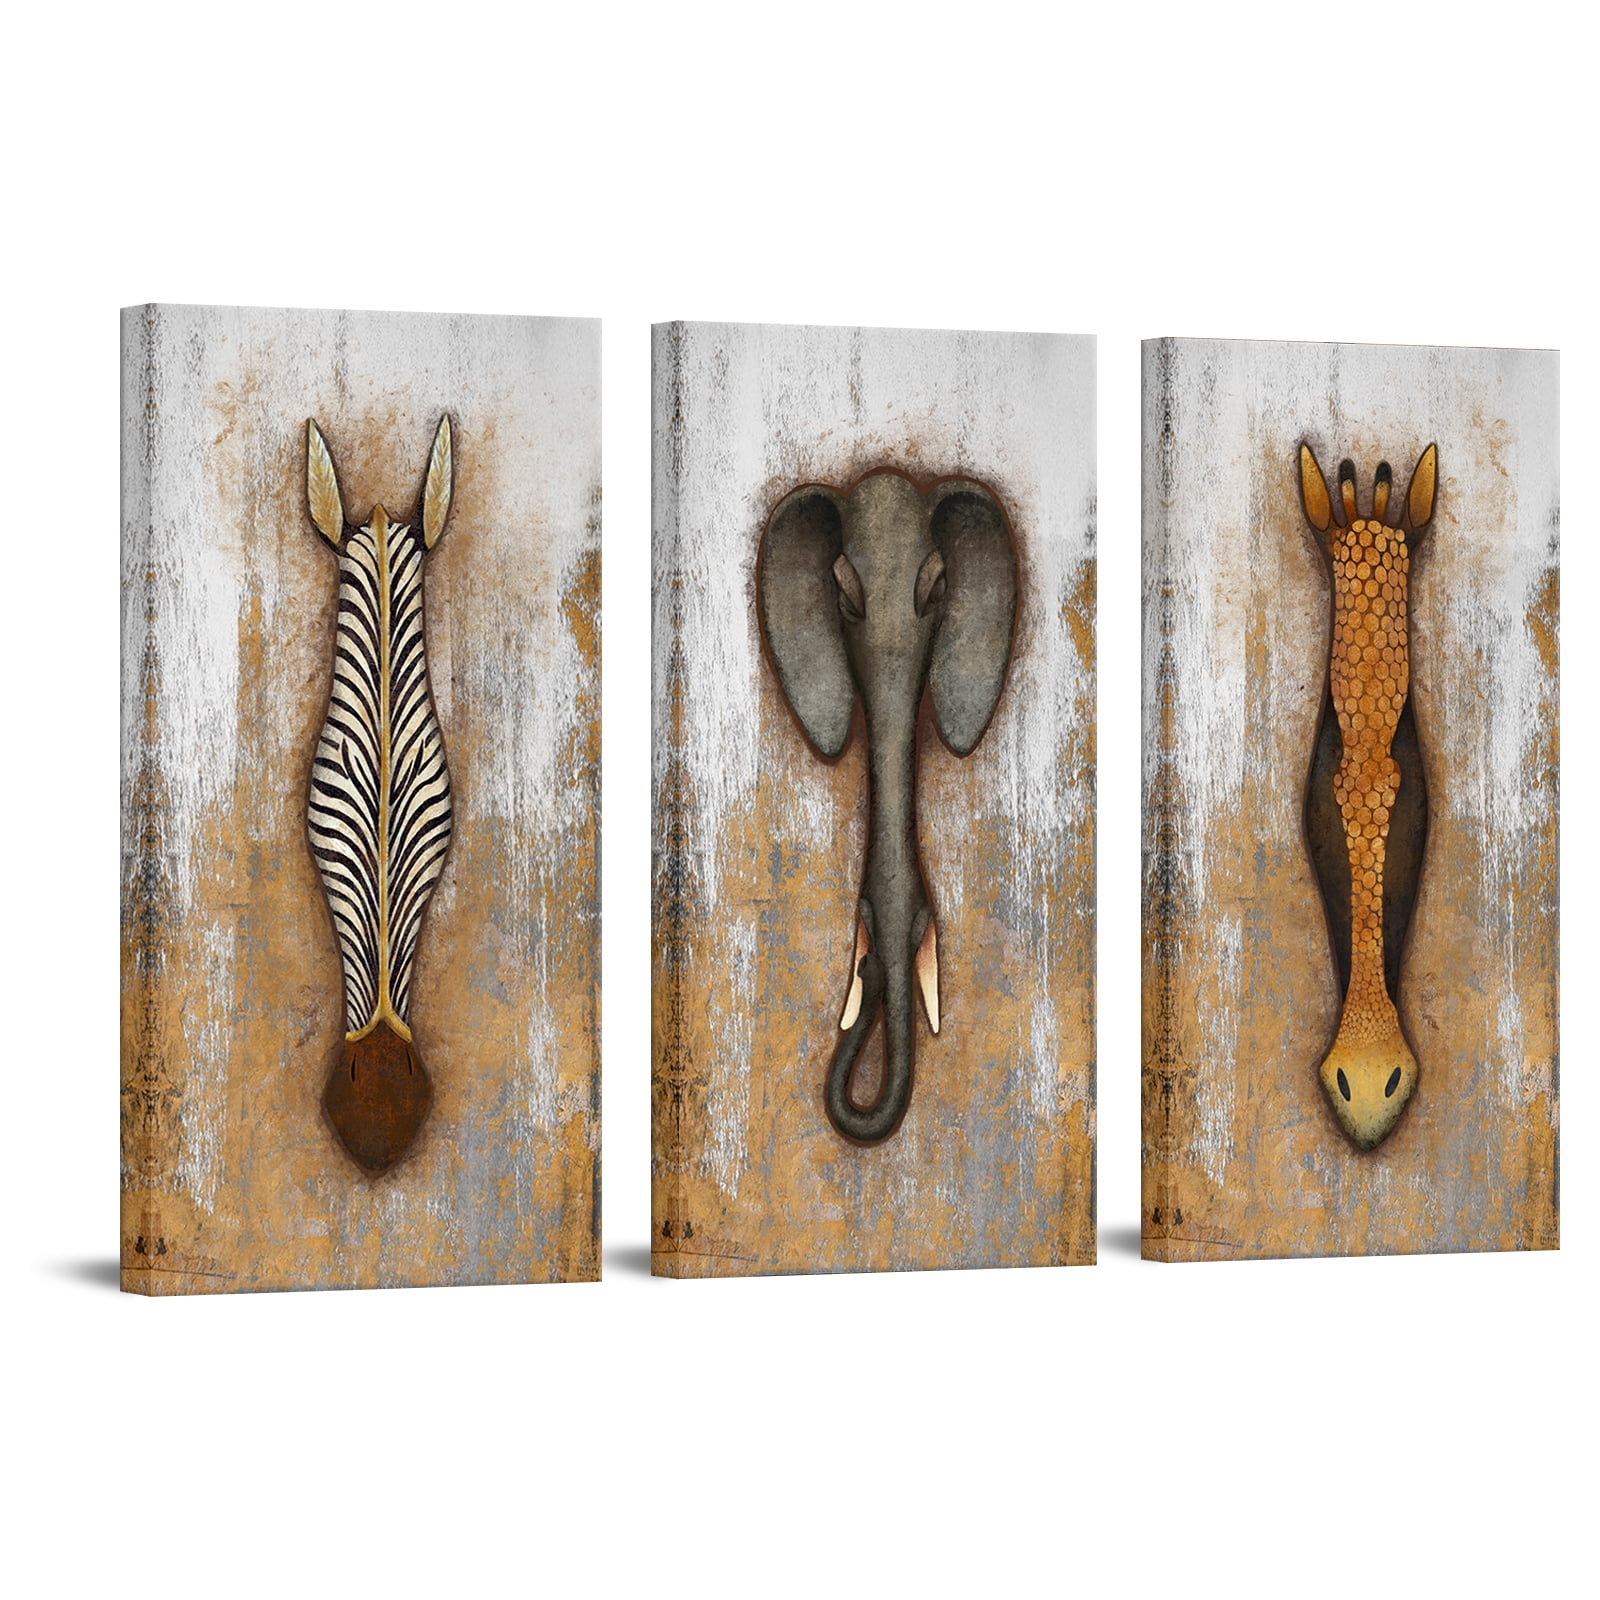 Visual Art Decor Vintage African Animal Canvas Wall Art Painting Giraffe  Zebra Elephant Wildlife Picture Rustic Print Home Decor Poster Stretched and  Framed Artwork 12 x 24 inch x 3Pcs